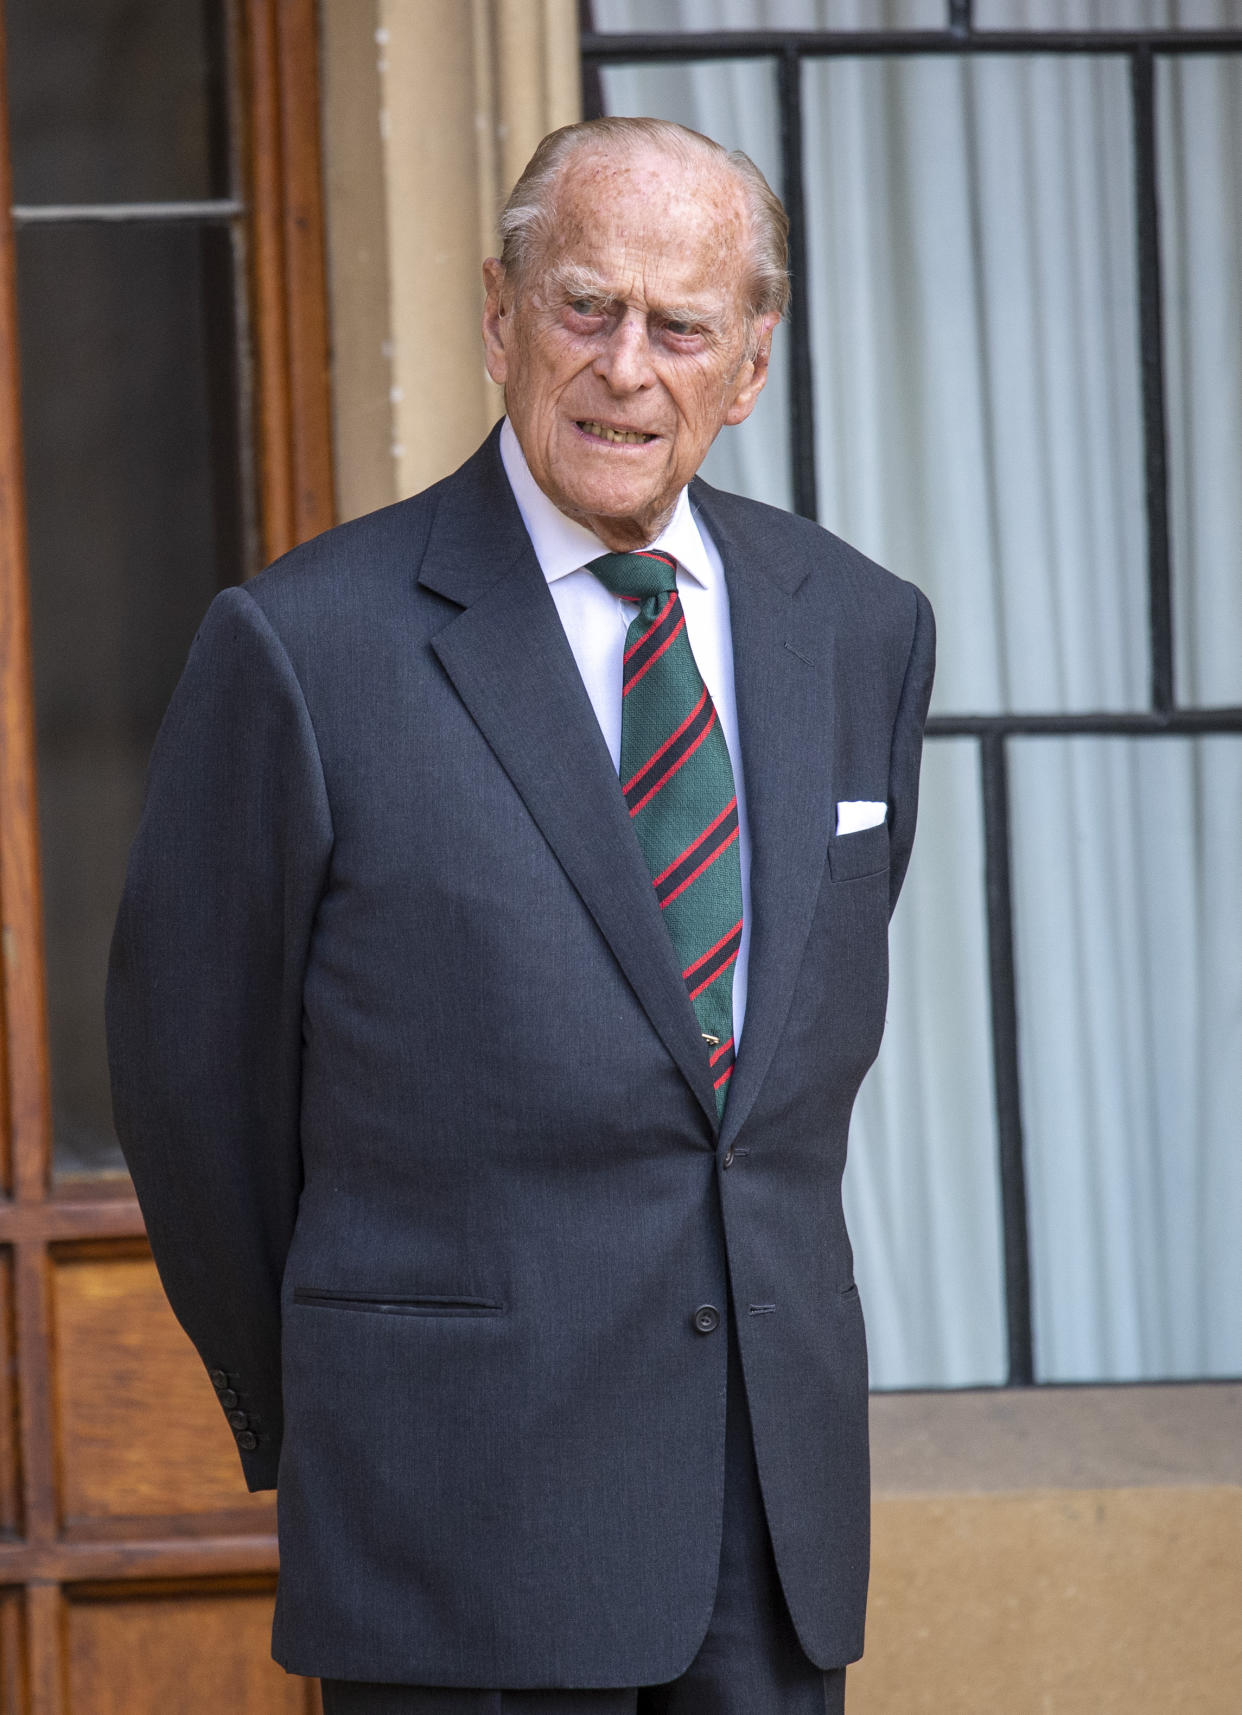 Prince Philip, Duke of Edinburgh attends a ceremony to mark the transfer of the Colonel-in-Chief of The Rifles at Windsor Castle on July 22, 2020.  The 99 year old Duke is stepping down from his role as Colonel-in-Chief after 67 years of service and is transferring it to Camilla,Duchess of Cornwall.